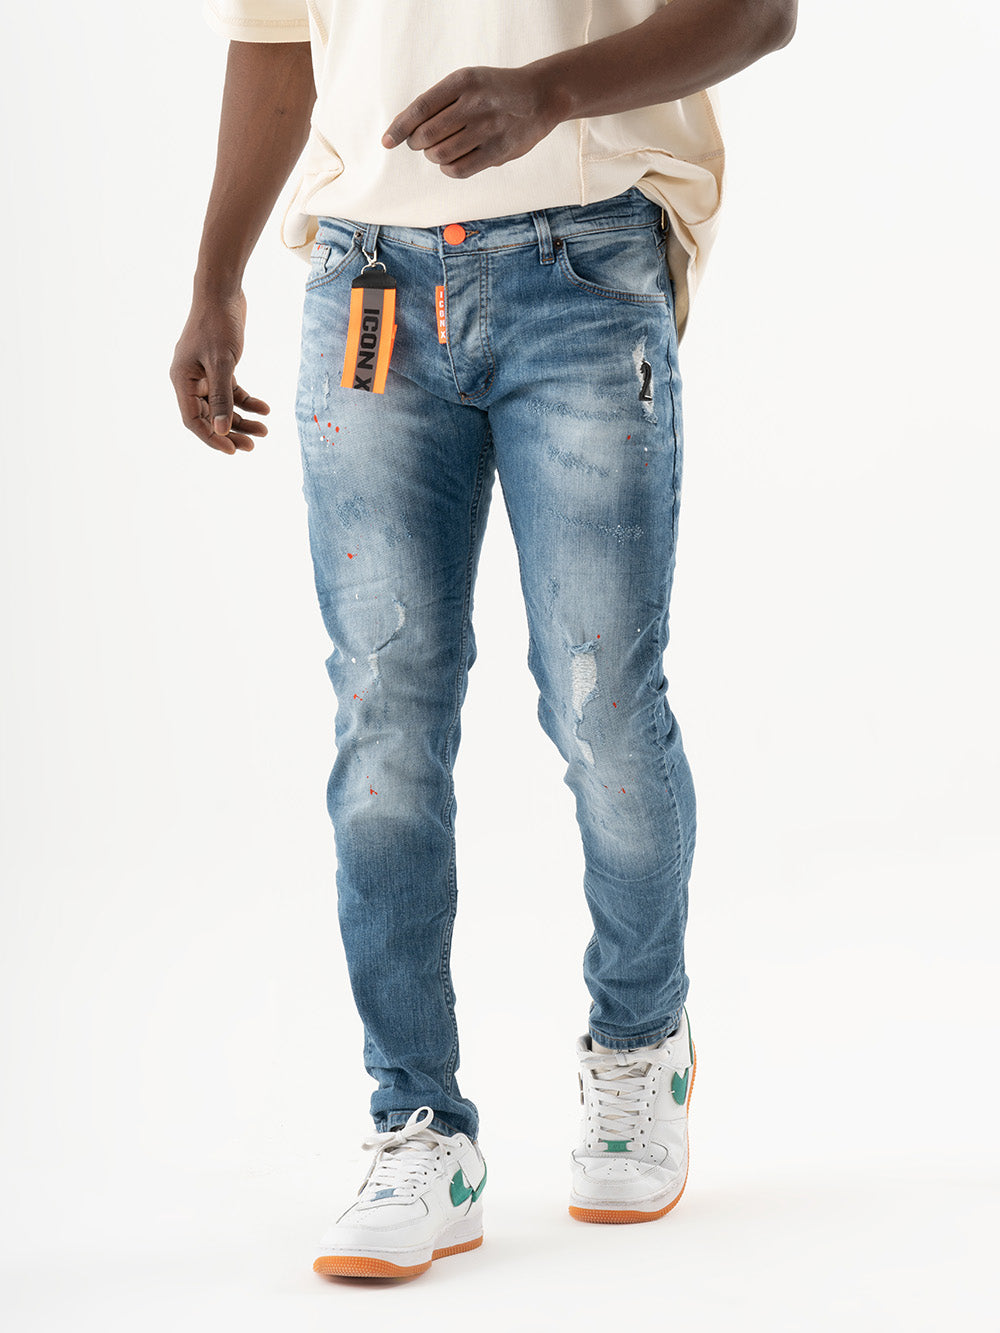 A man wearing TEZAR jeans and a white t - shirt.